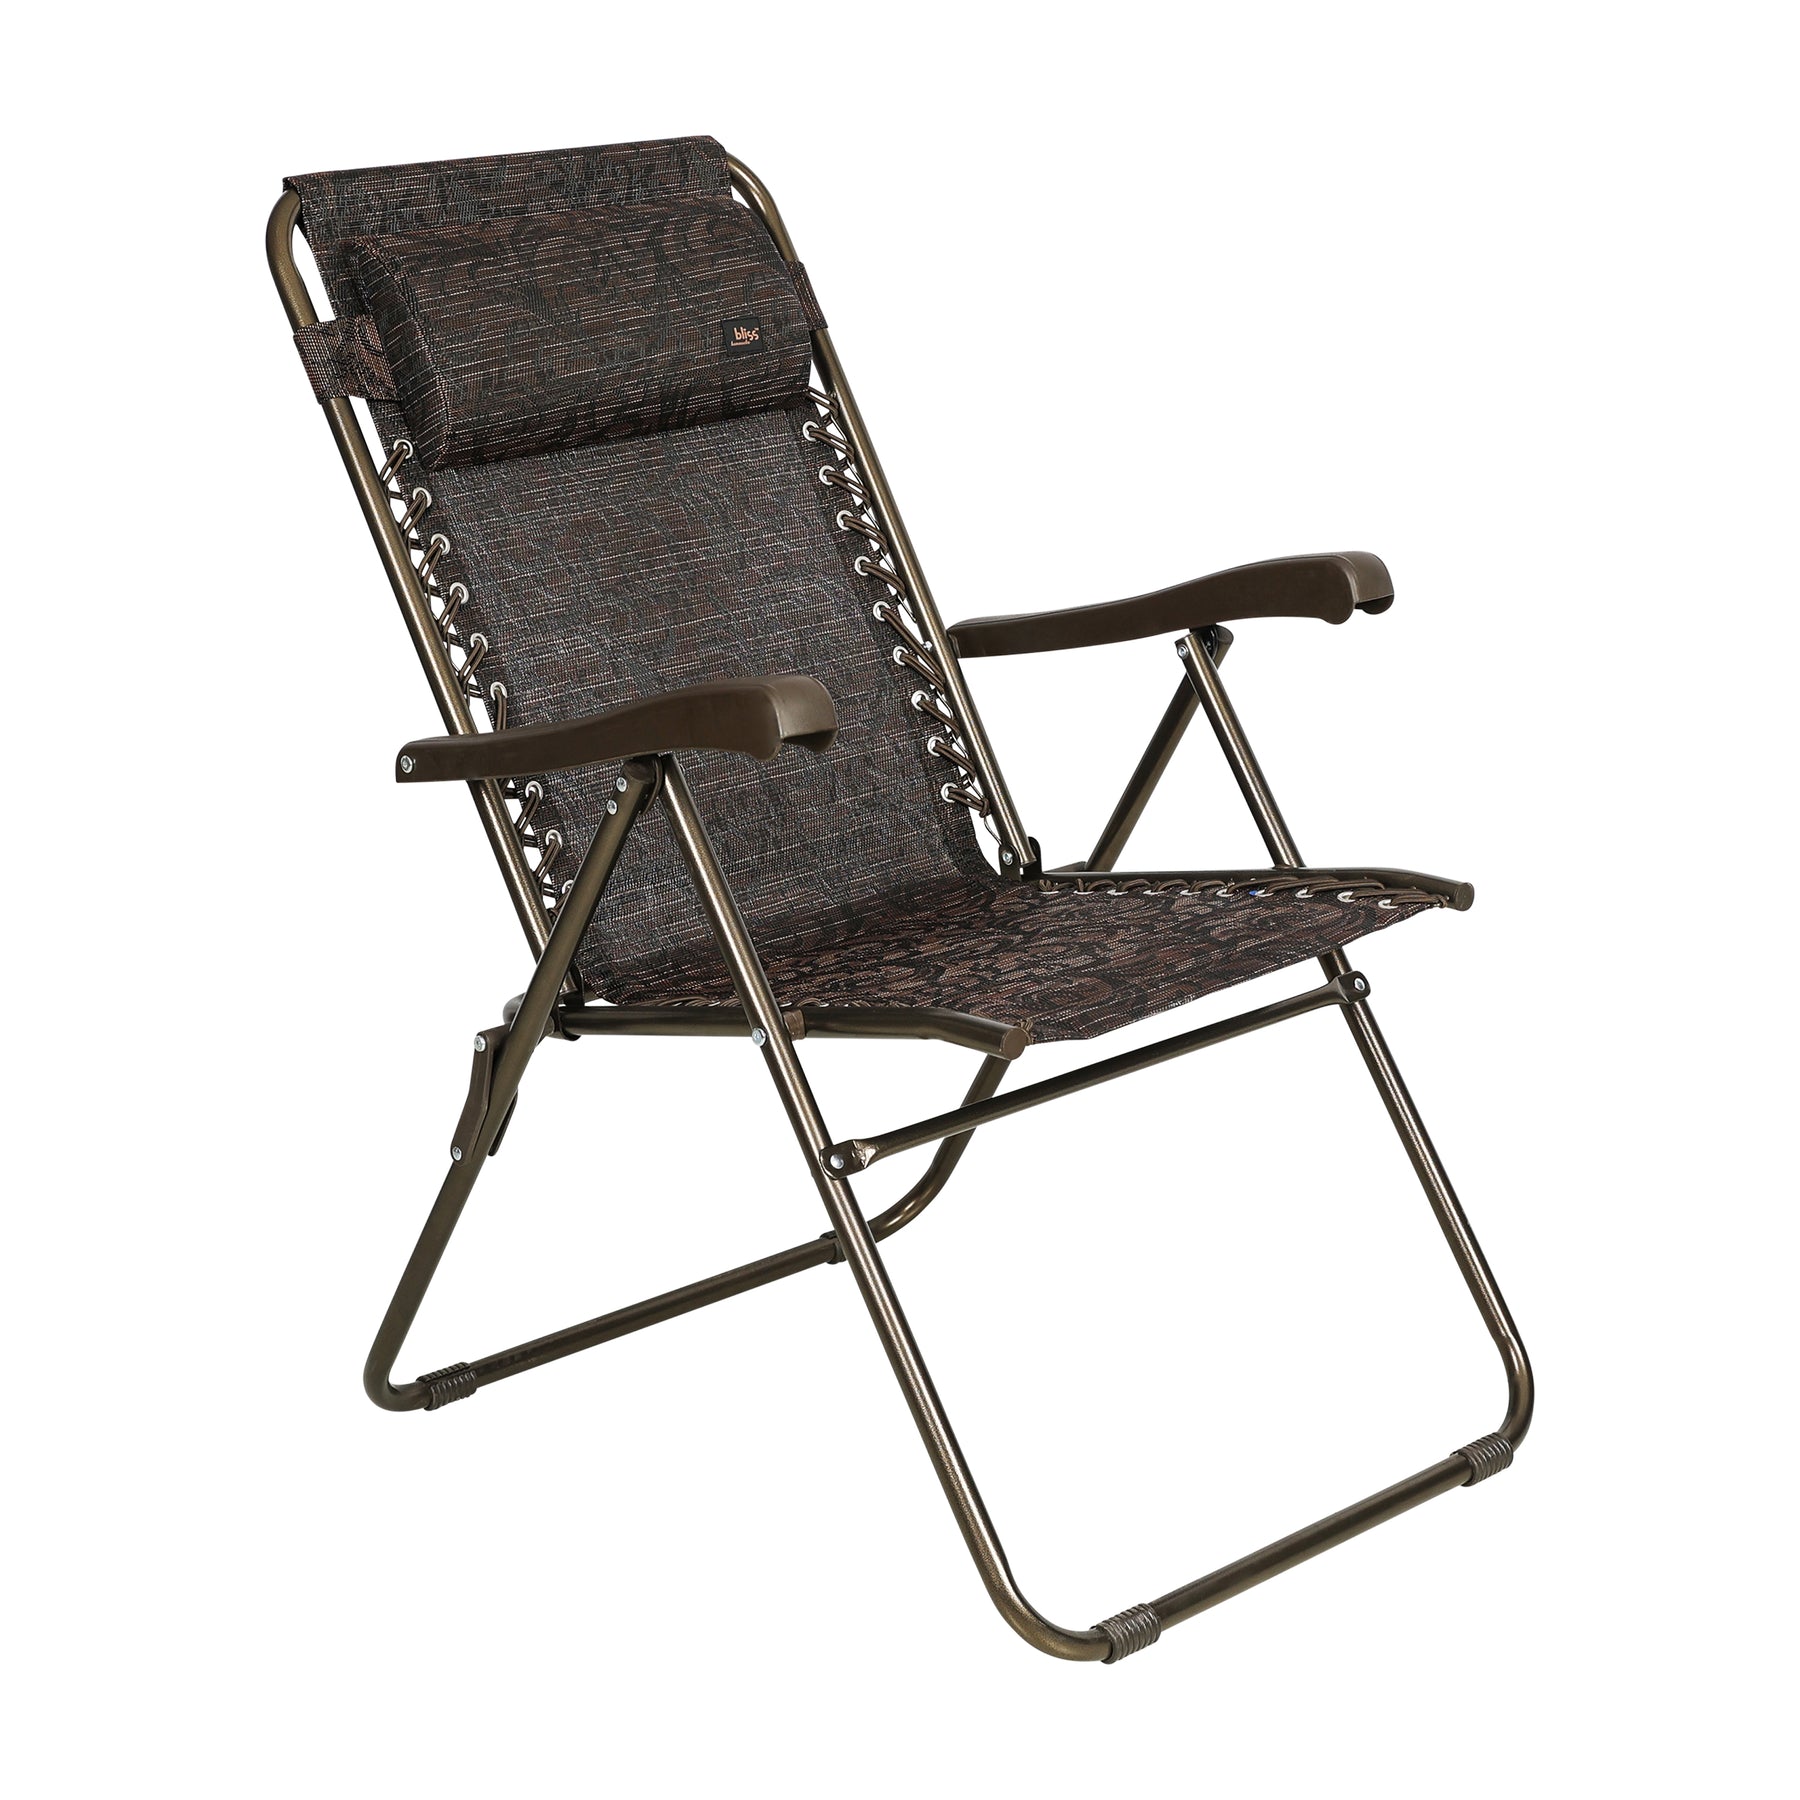 Bliss Hammocks 26-inch Wide Reclining Sling Chair with Pillow in the brown jacquard variation: a brown color with a jacquard pattern.